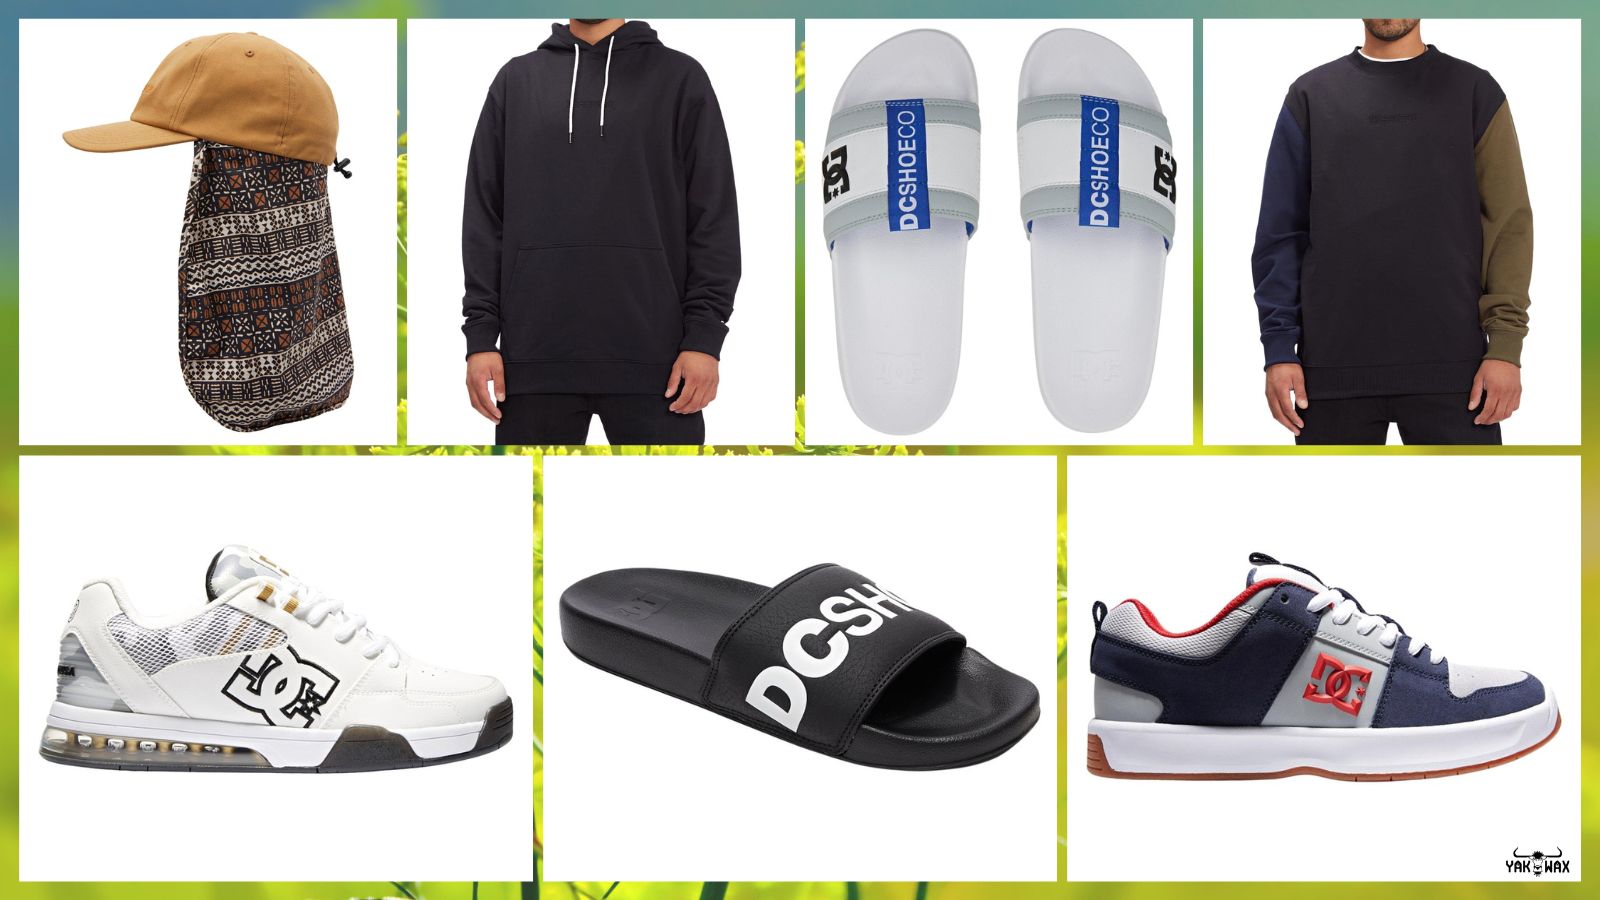 DC-Skate-Shoes-Clothing-Accessories-Spring-2022-Drop